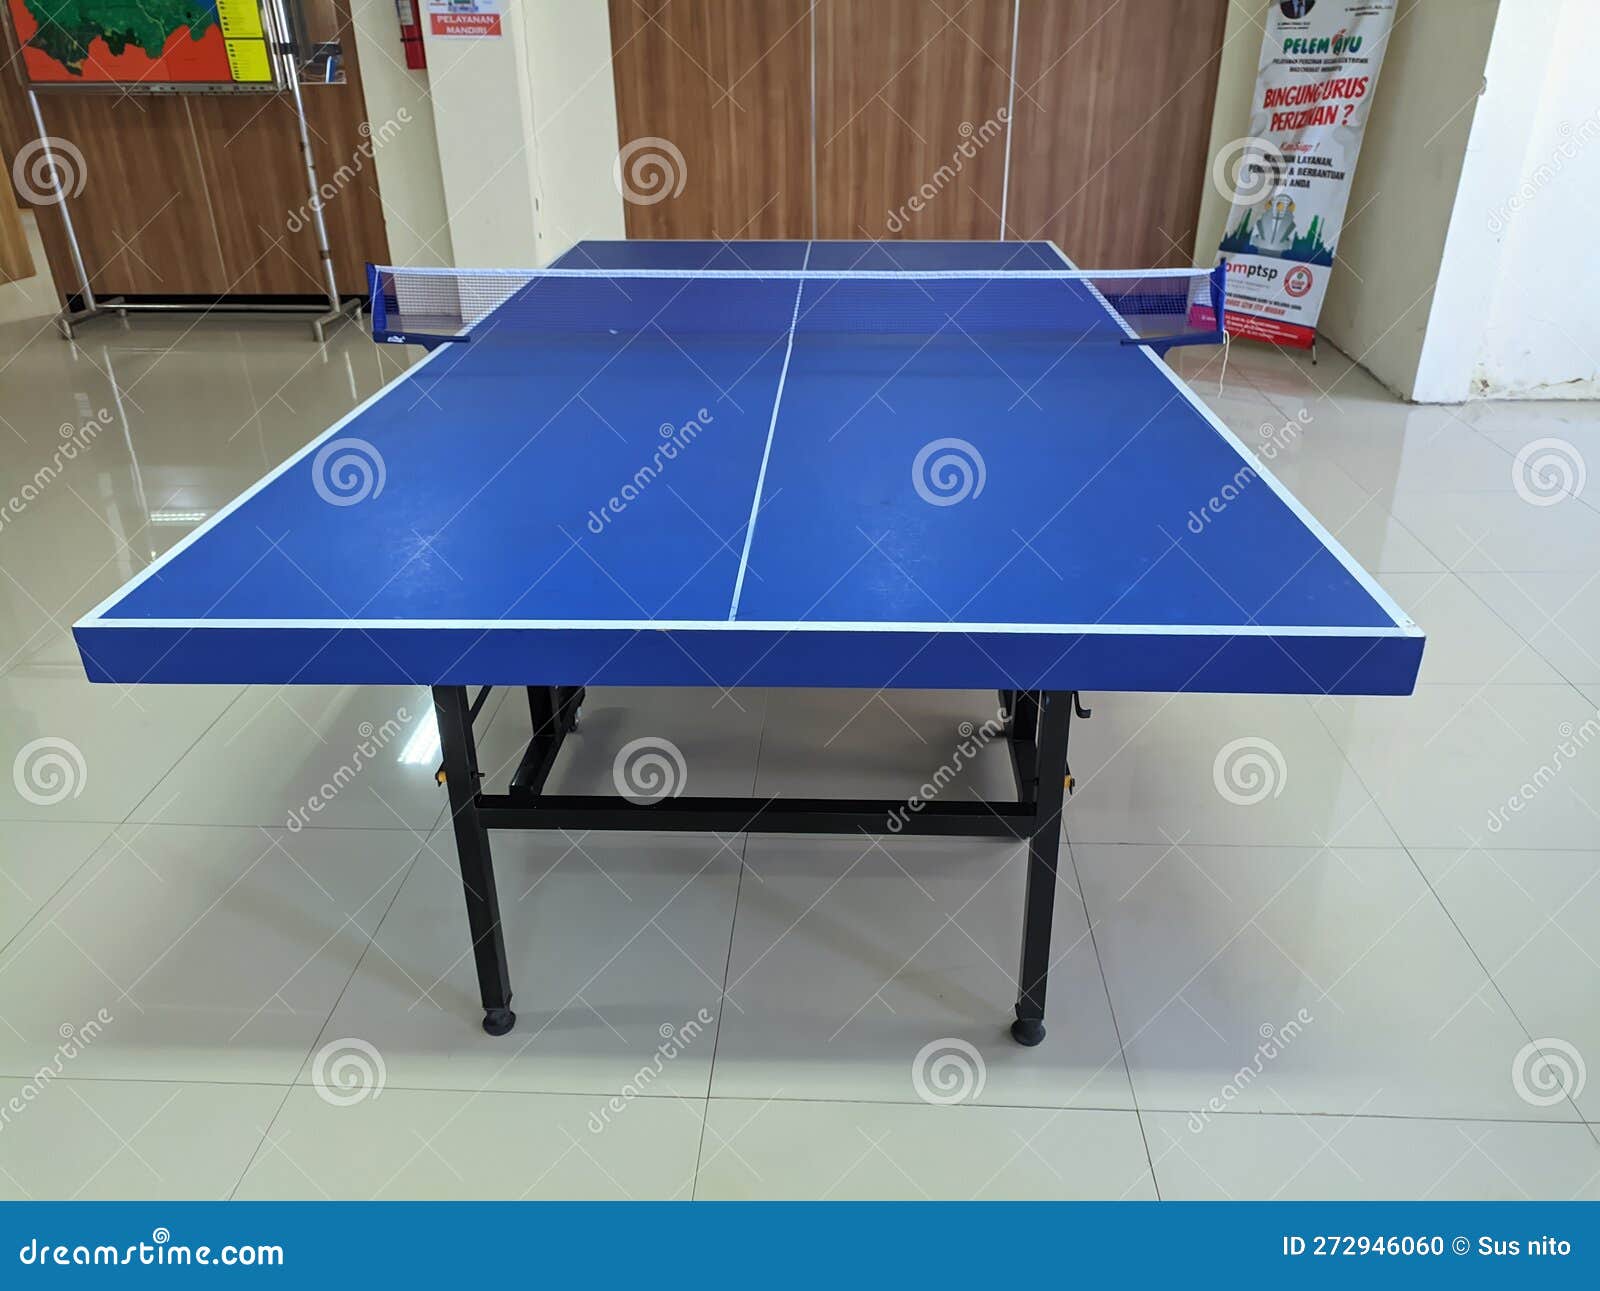 table tennis in goverment office good for healthy